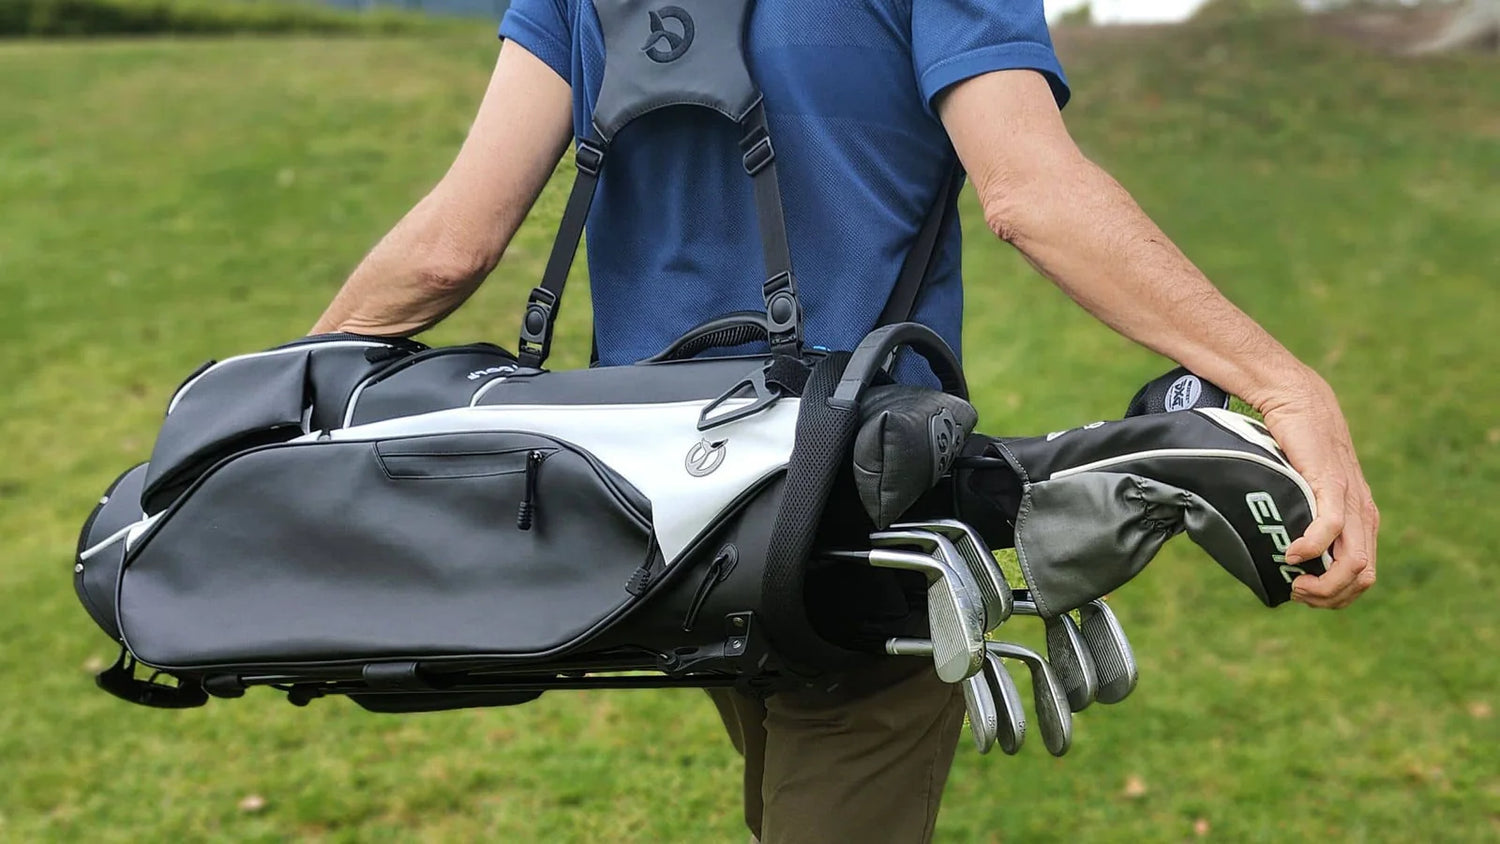 Vessel Golf Player Stand Bag Review, Page 4